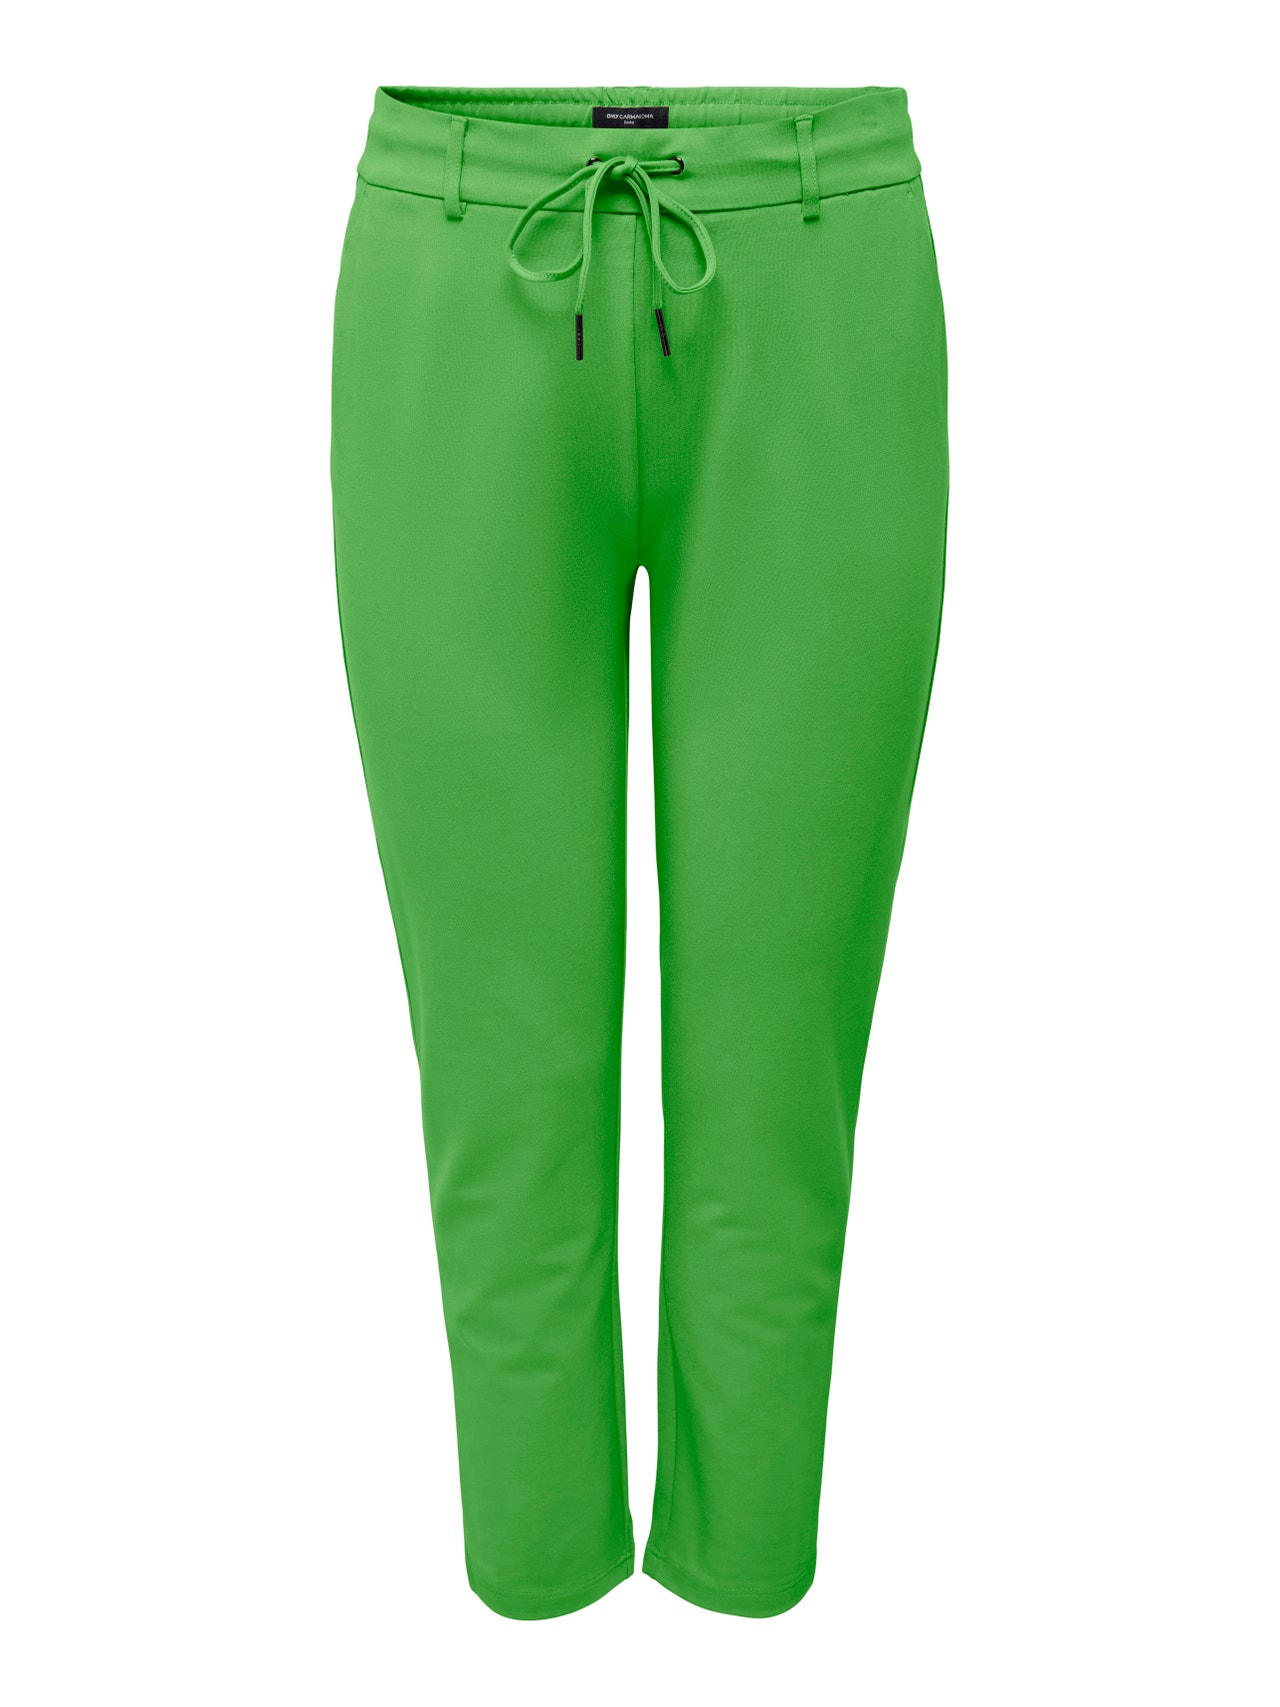 ONLY Curvy draw string pants -Classic Green - 15287532